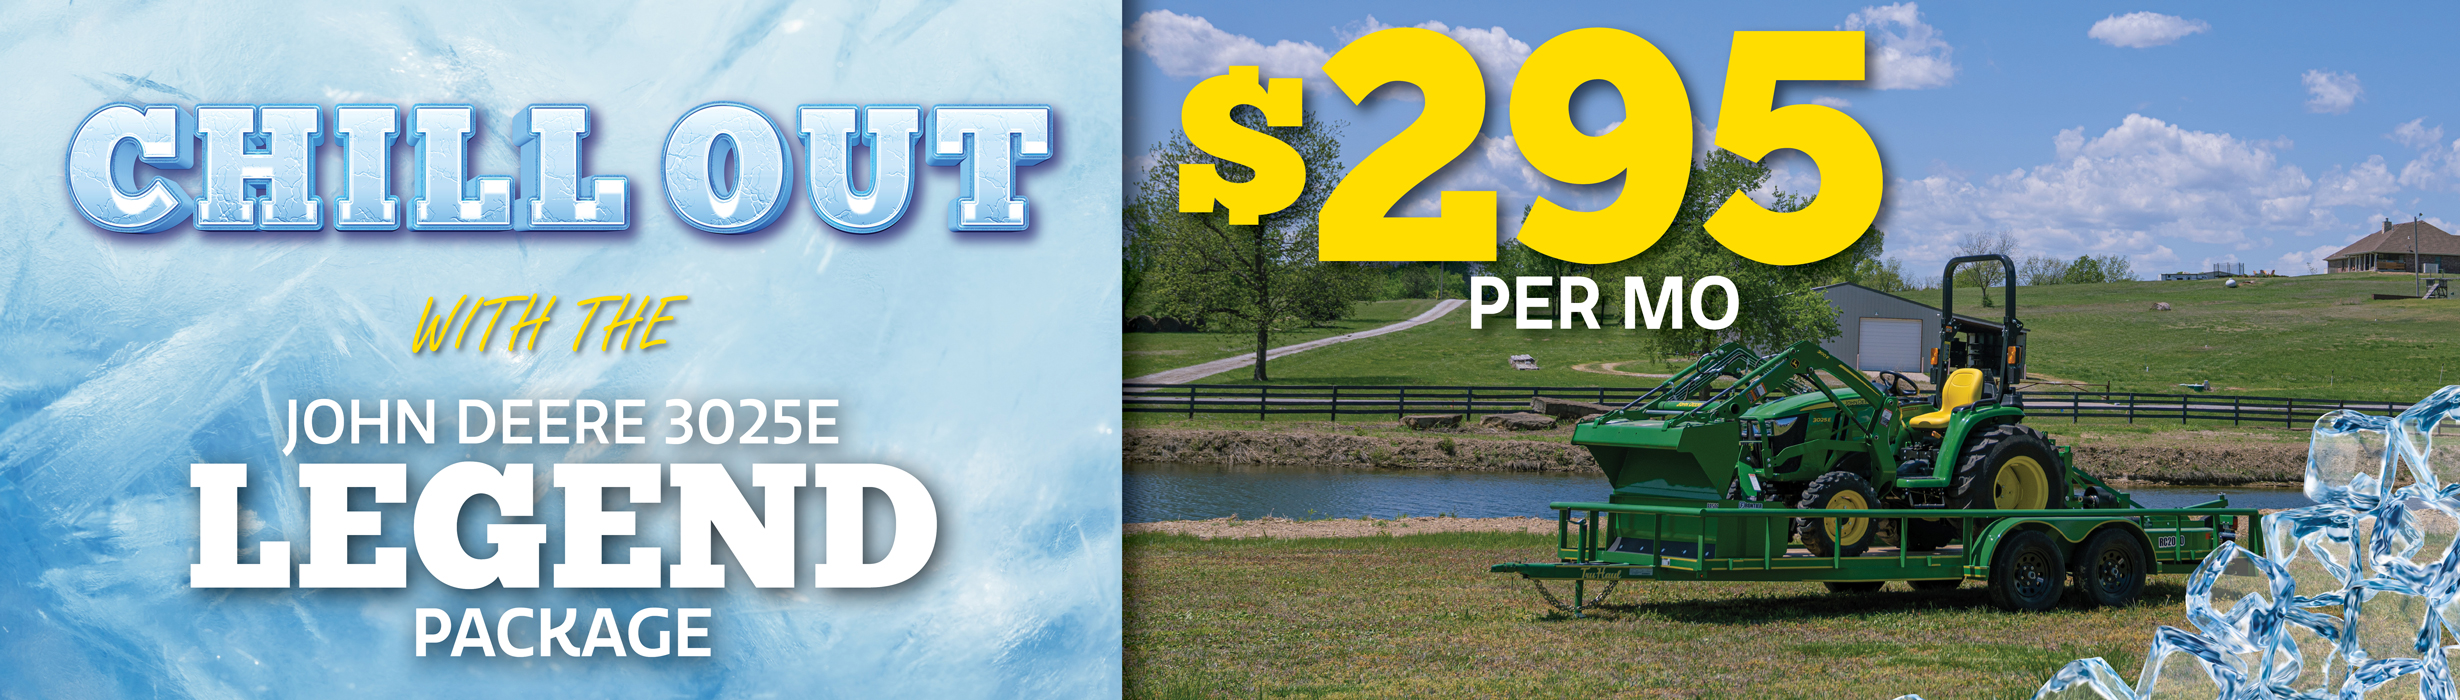 Chill Out this Summer with the John Deere Legend Package!